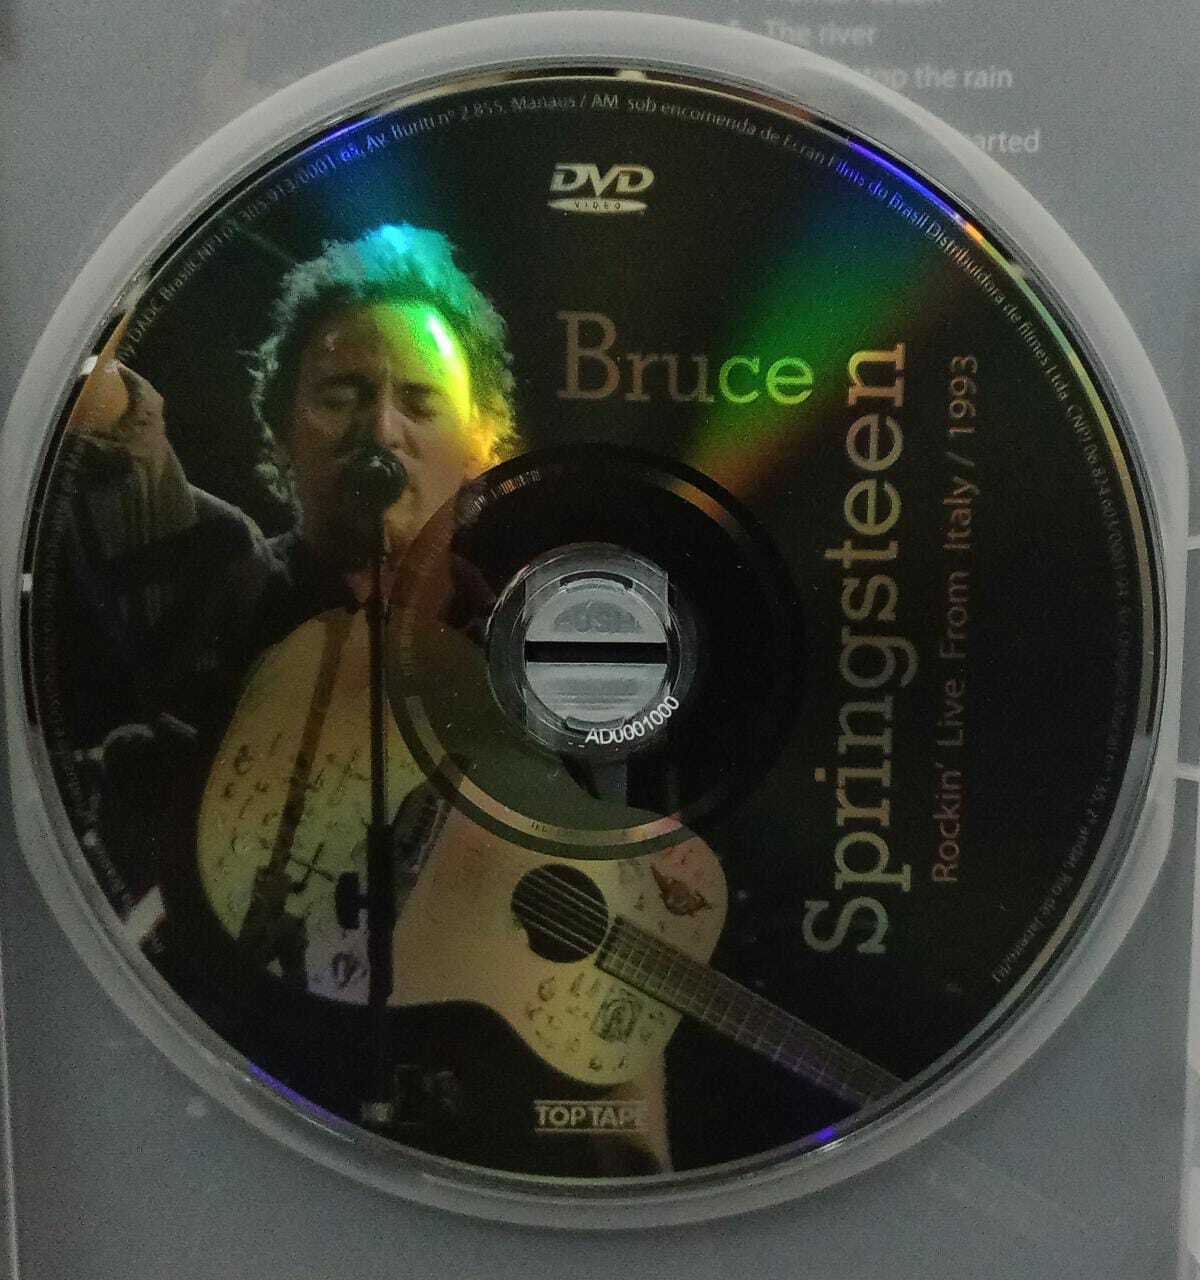 DVD - Bruce Springsteen - Rockin Live From Italy 1993